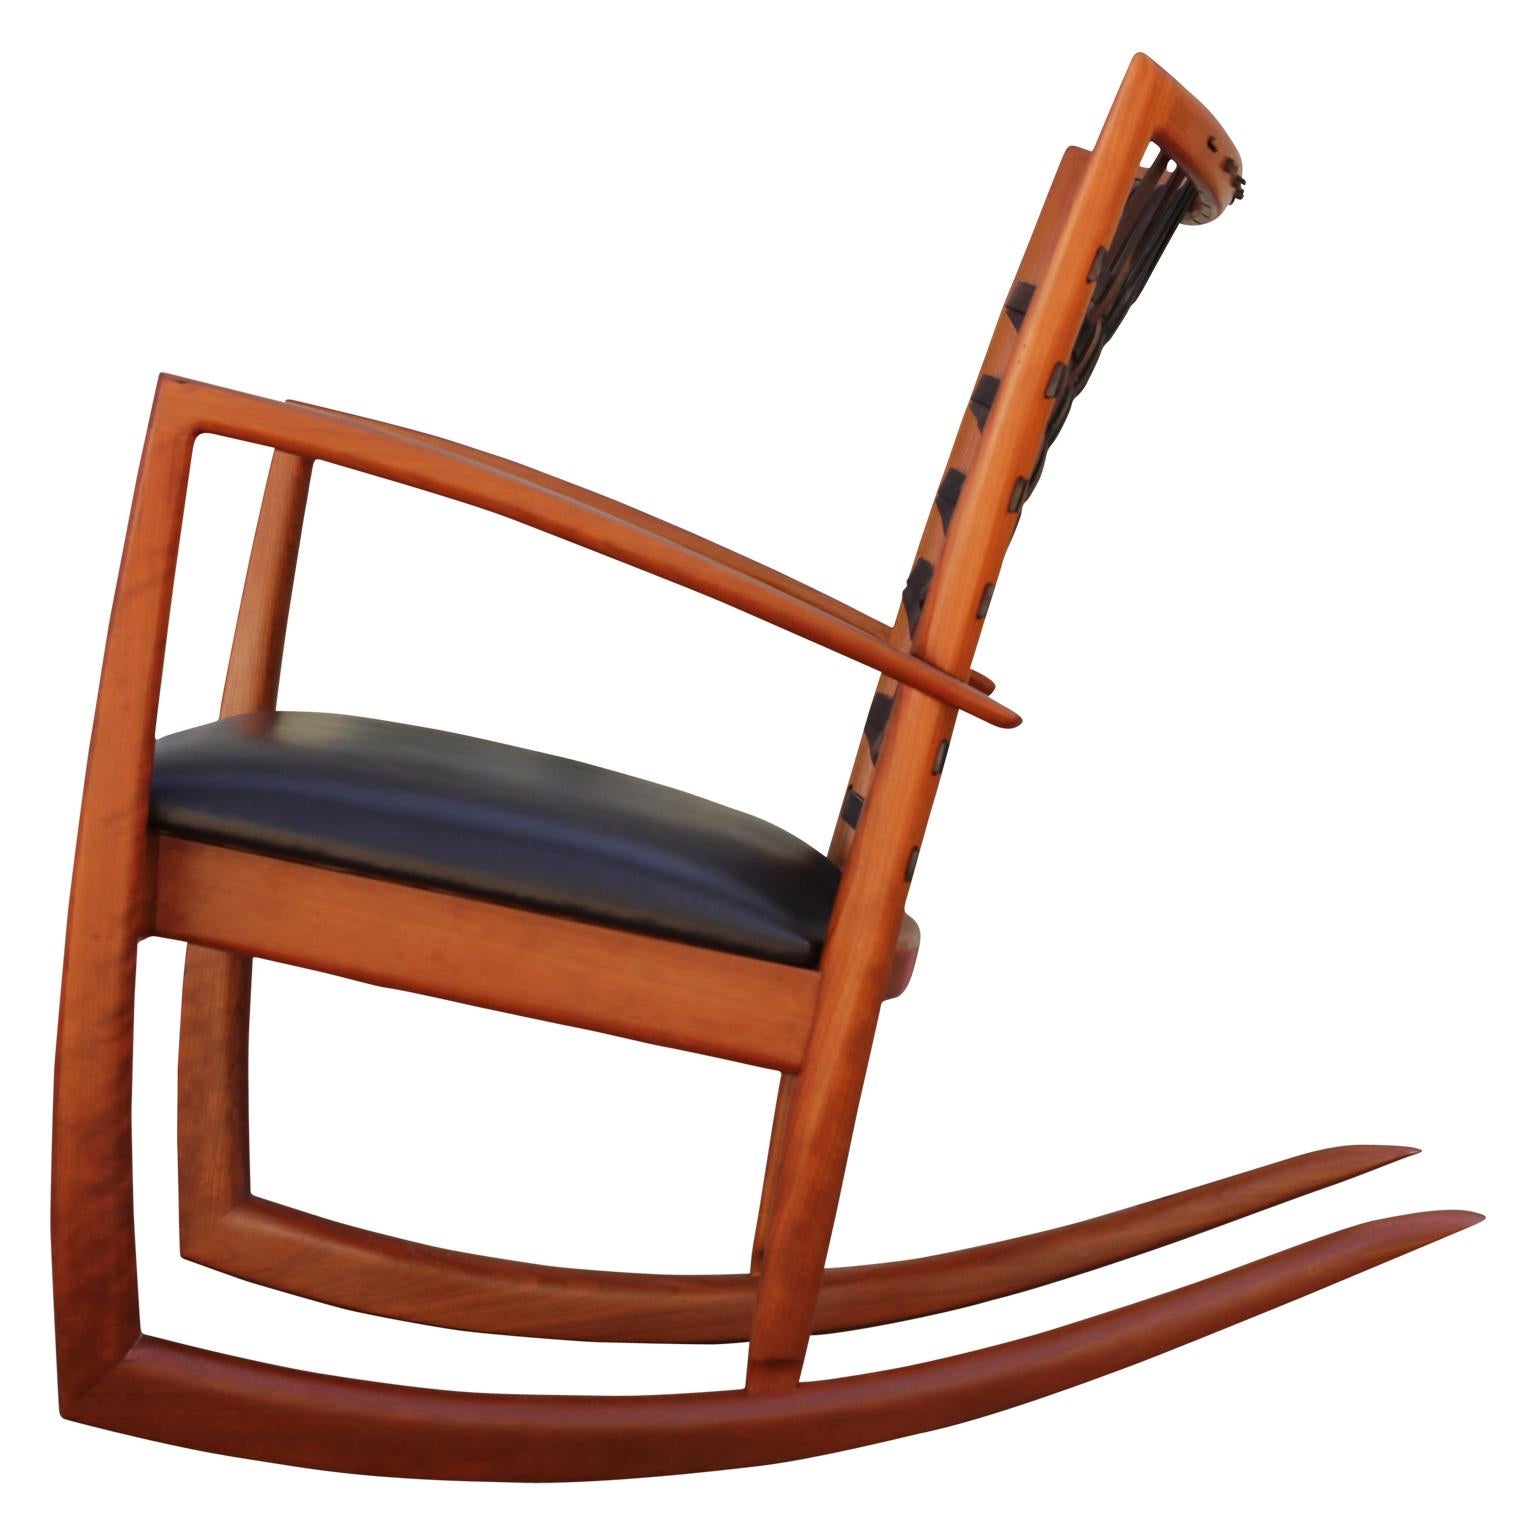 Sculptural modern cherrywood rocking chair
- Made by Houston Crafter roger deatherage
- Made with cherrywood
- Adjustable woven leather backing
- Leather seats
- Modern sculptural design
- Sold as pair or individually.